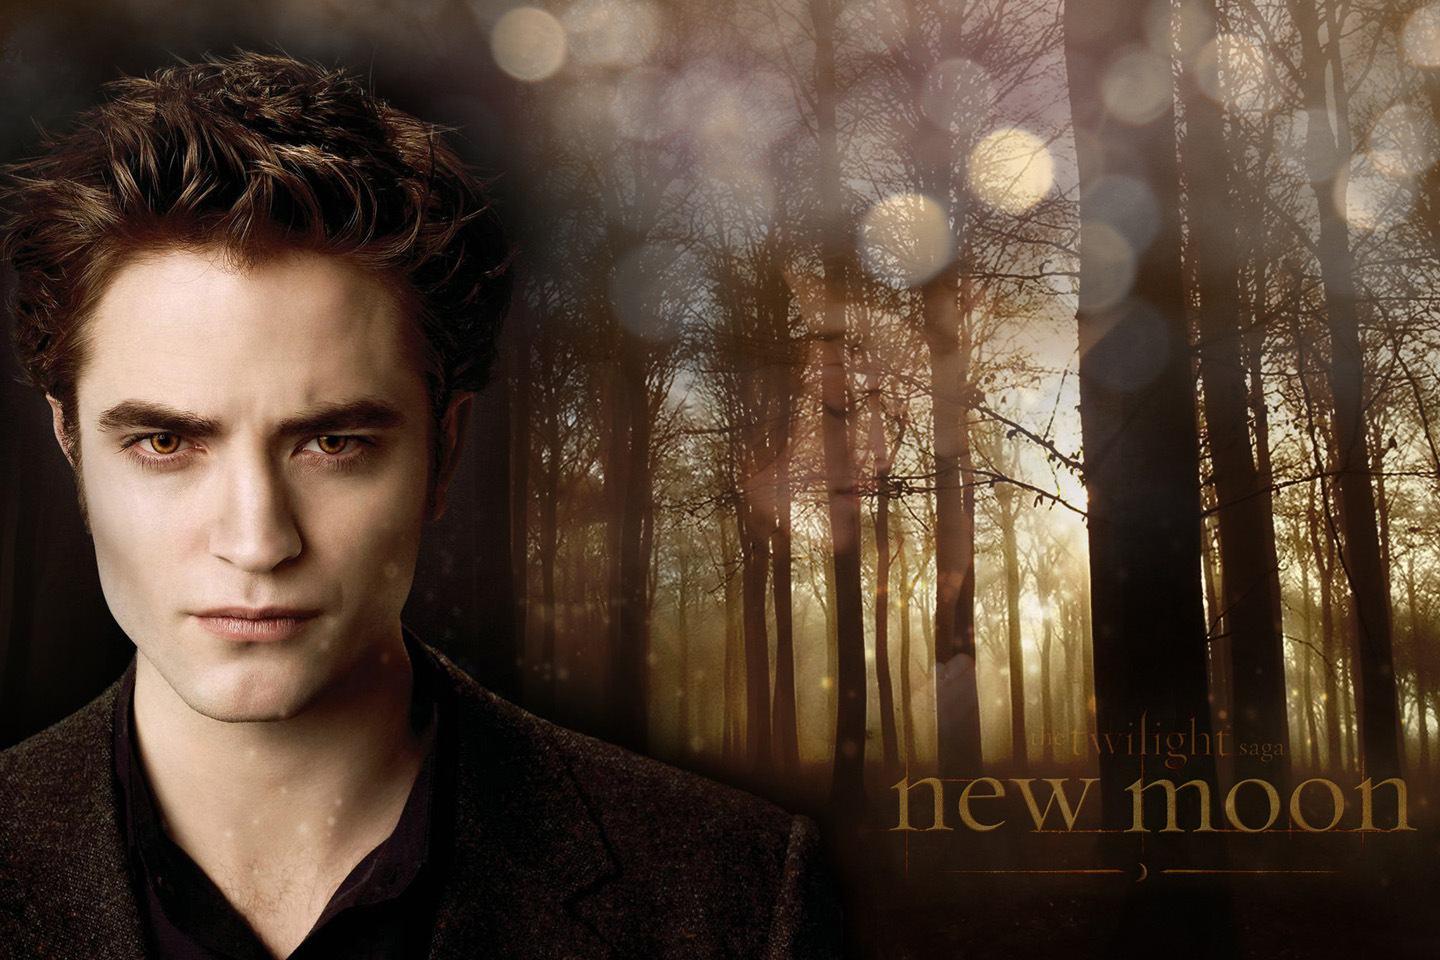 Wallpapers Of Edward Cullen - Wallpaper Cave